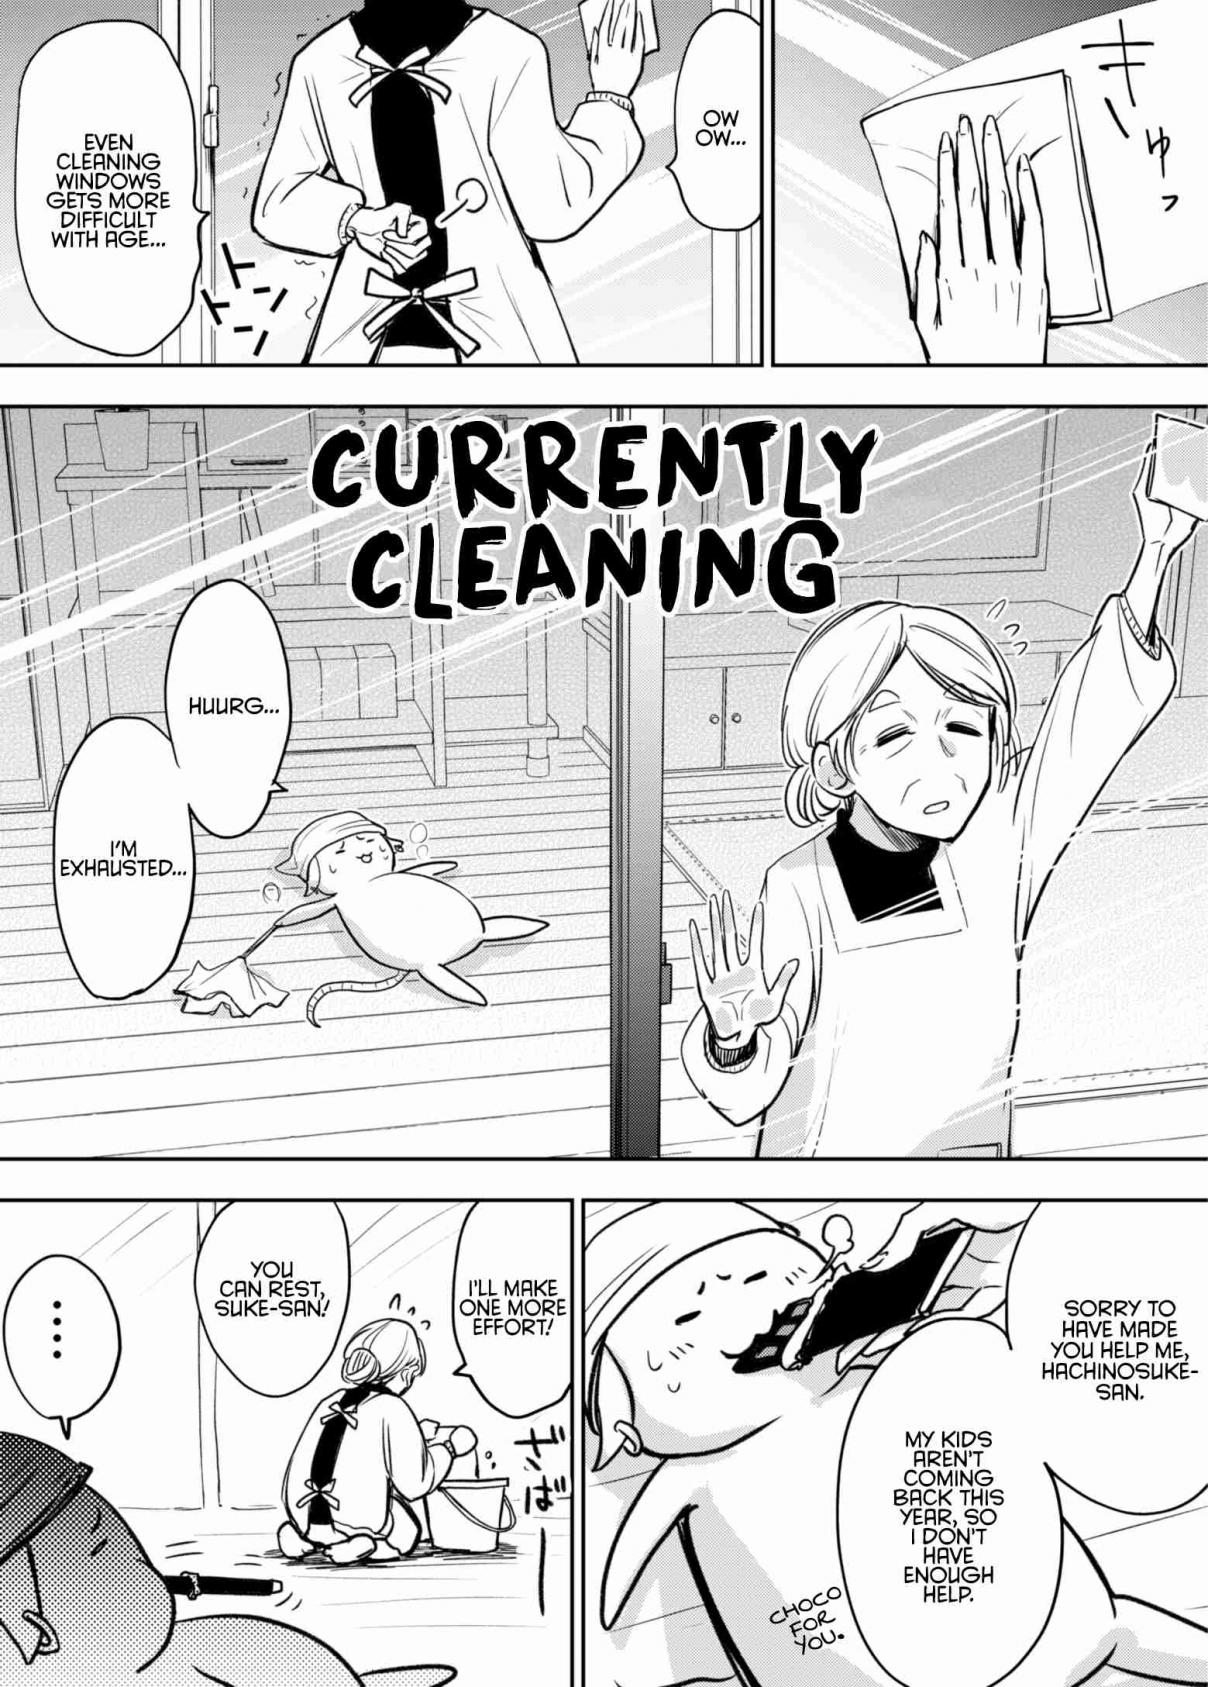 Grandma in the Magical Girl Ch. 5 New Year's Eve